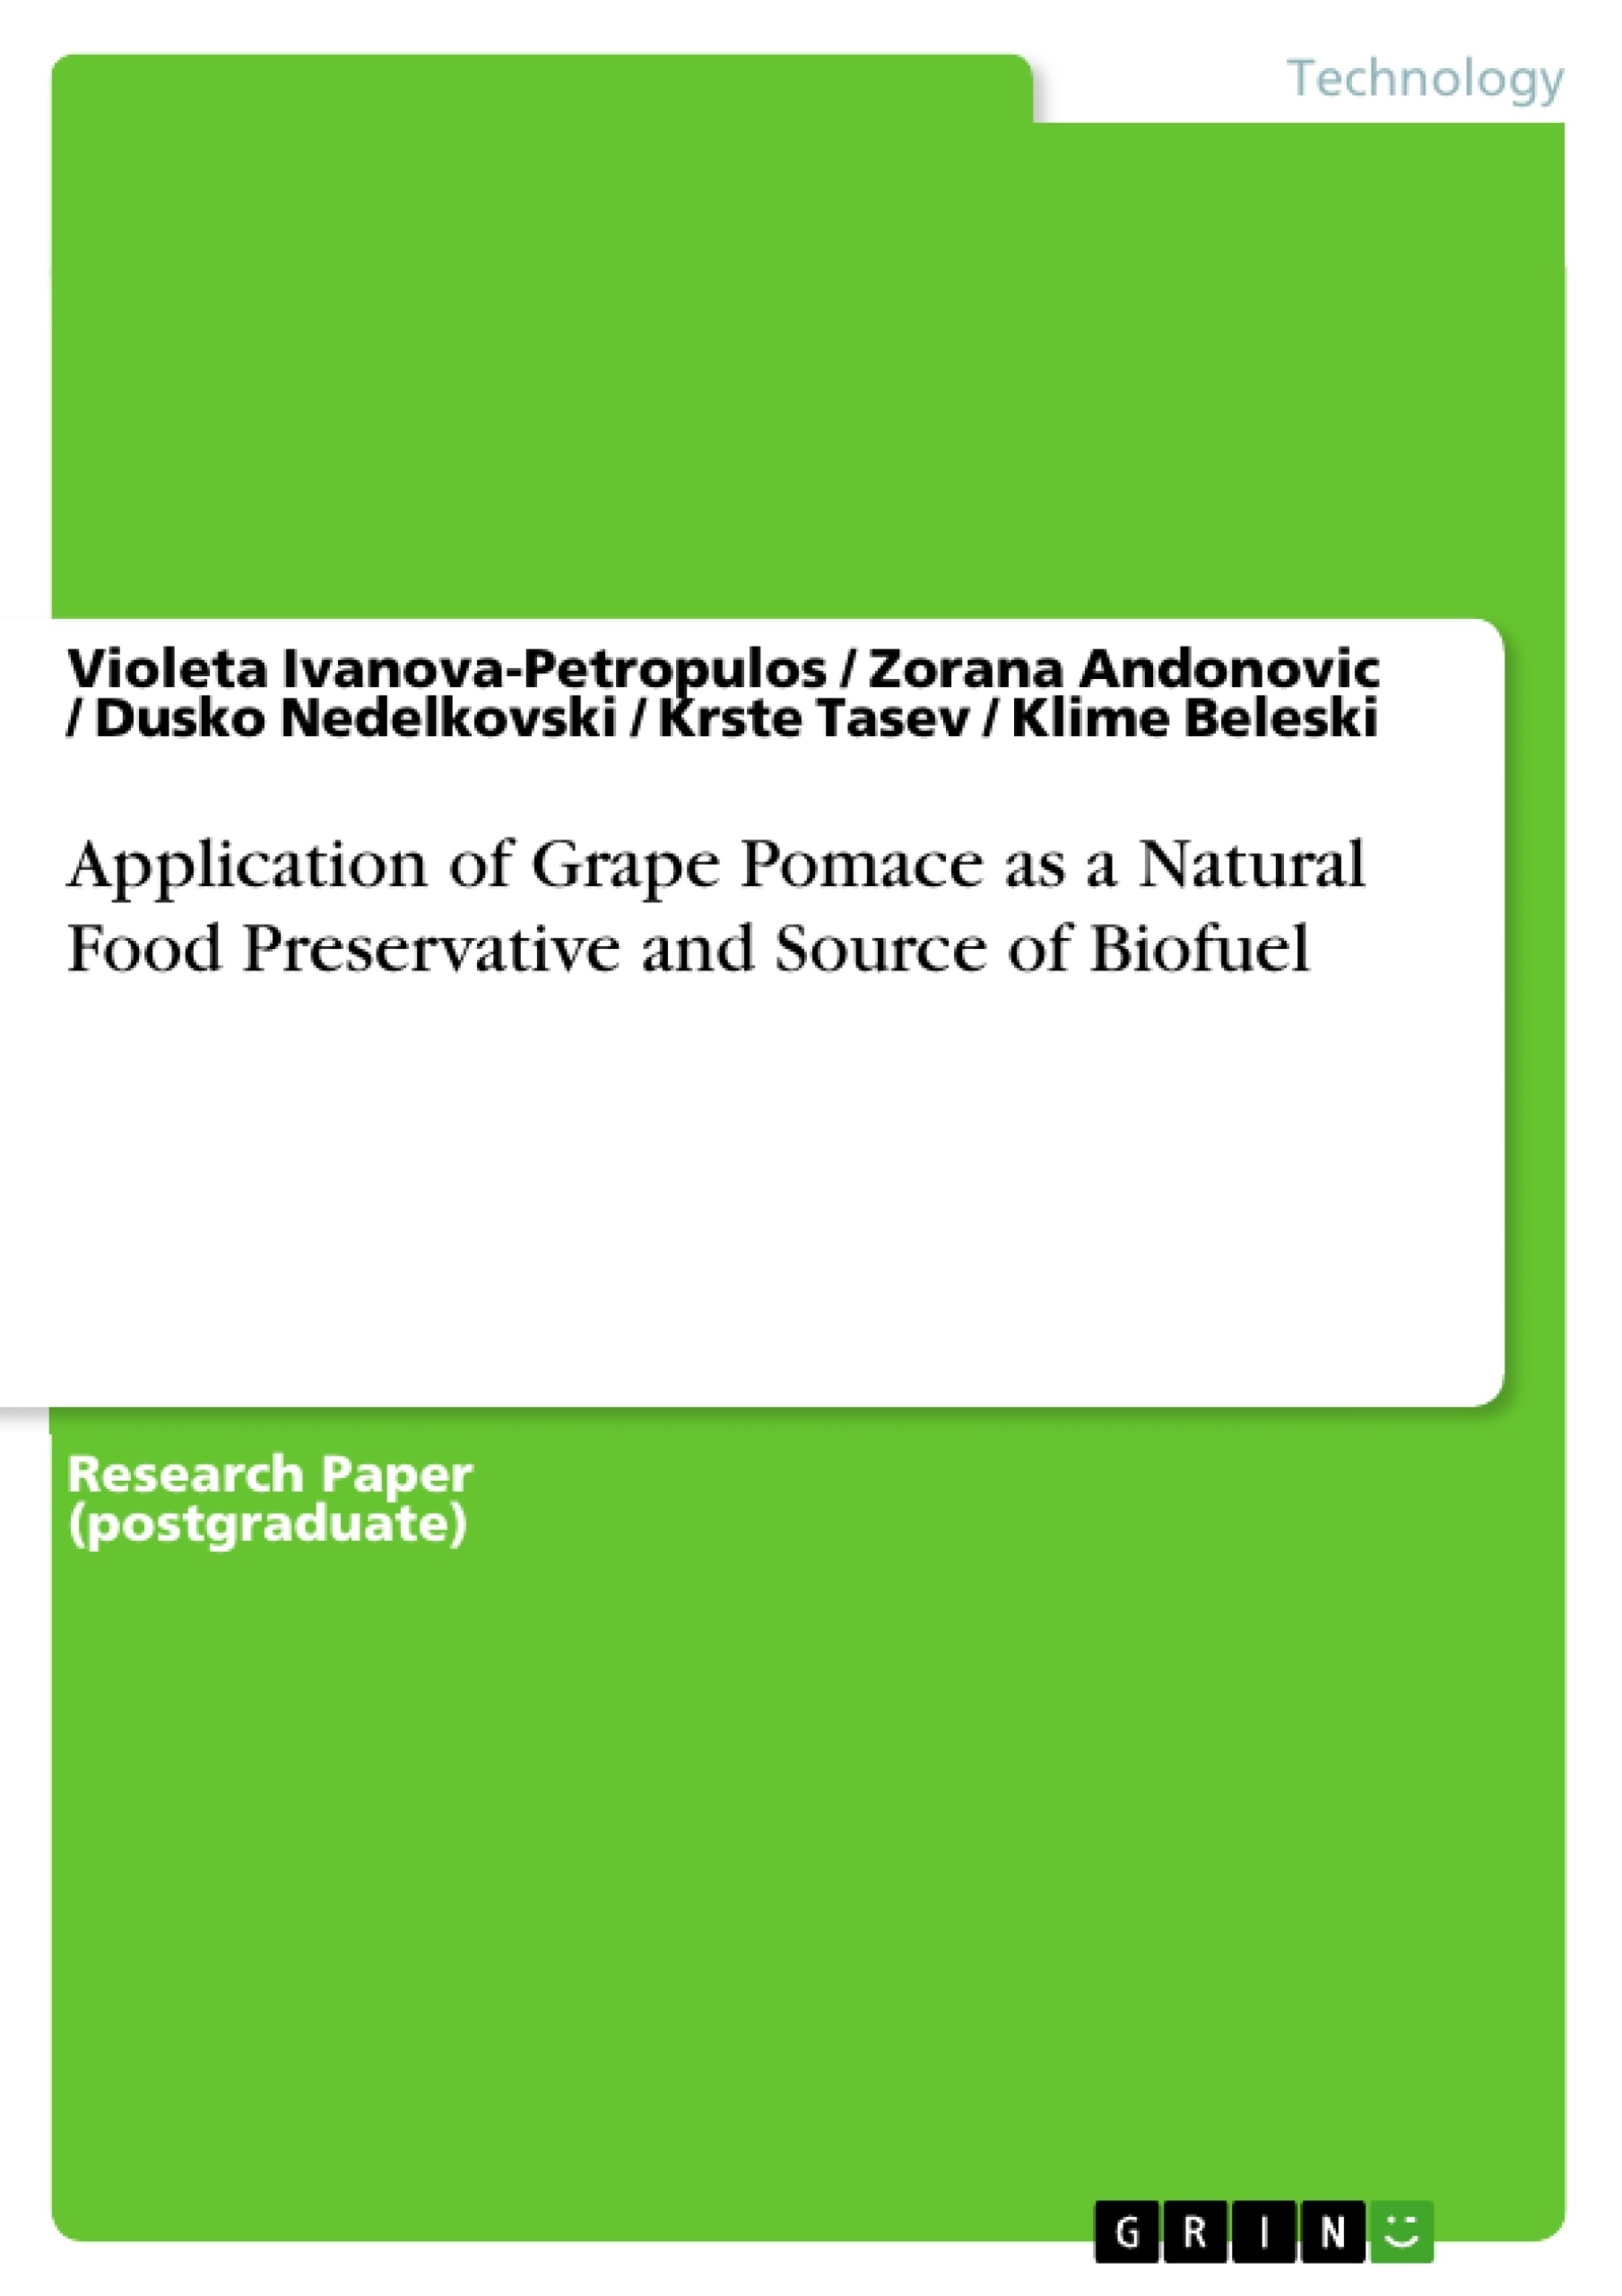 Titre: Application of Grape Pomace as a Natural Food Preservative and Source of Biofuel